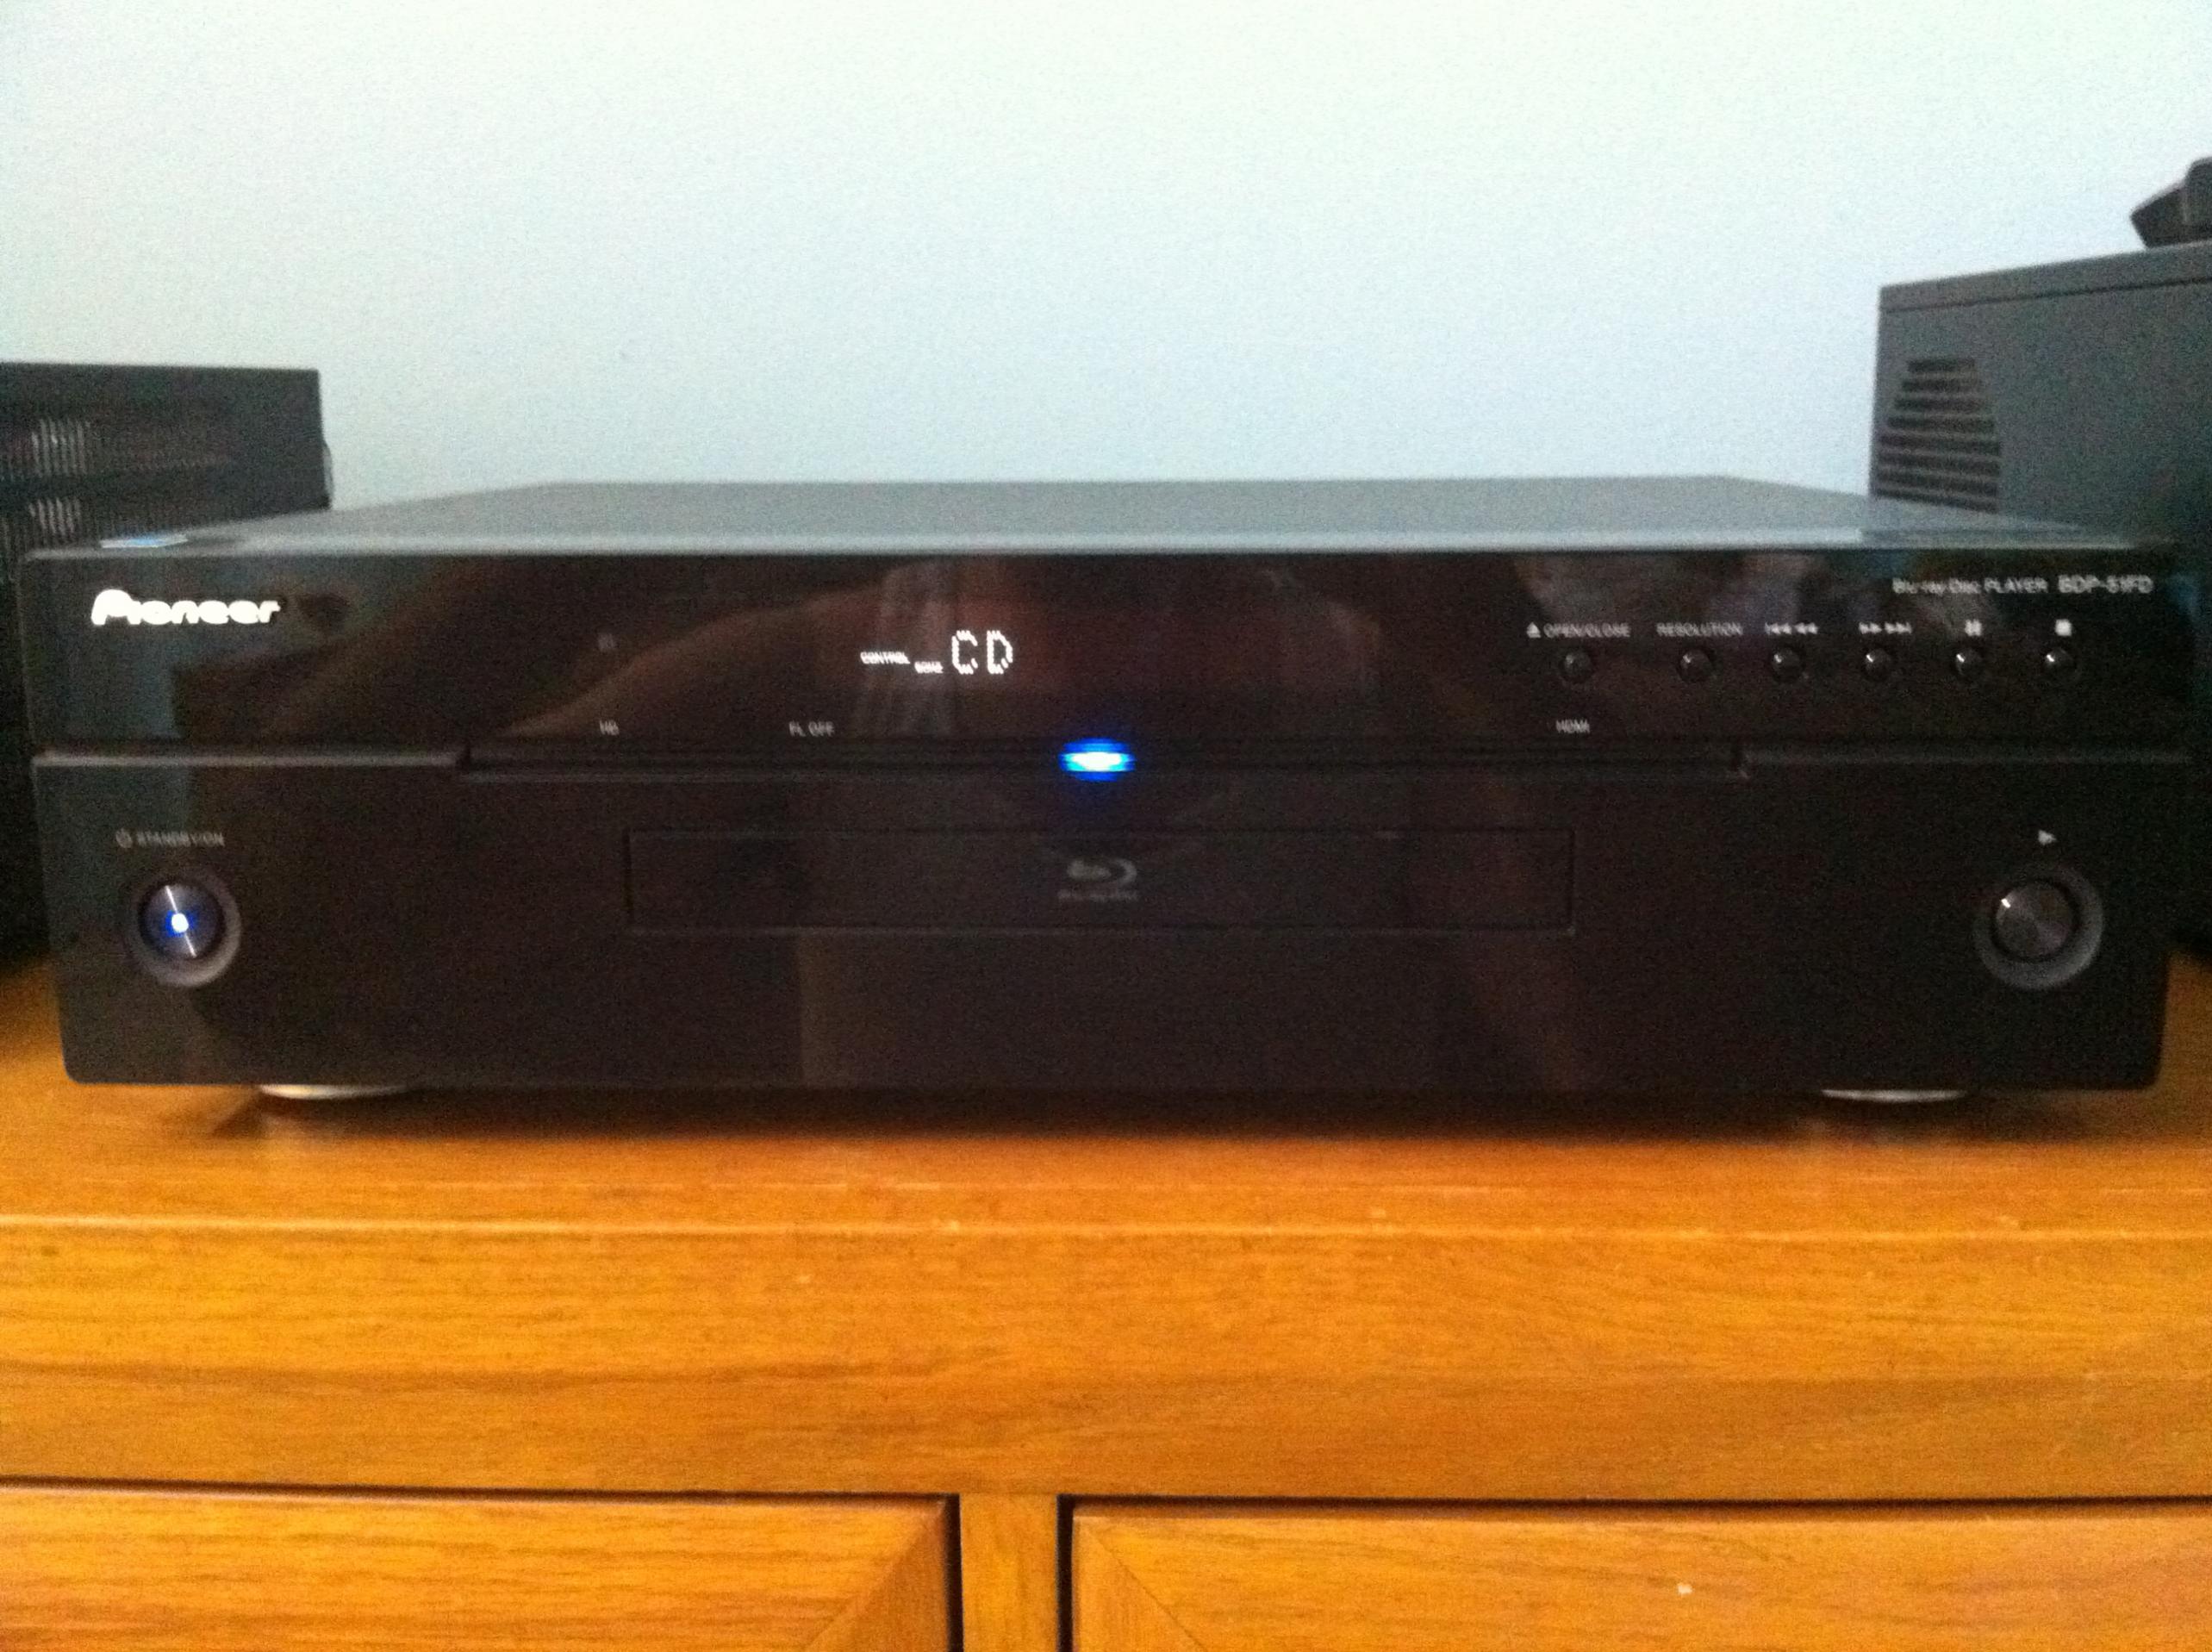 Download Pioneer Bdp-51fd Blu-ray Disc Player Firmware 1.74 For Mac